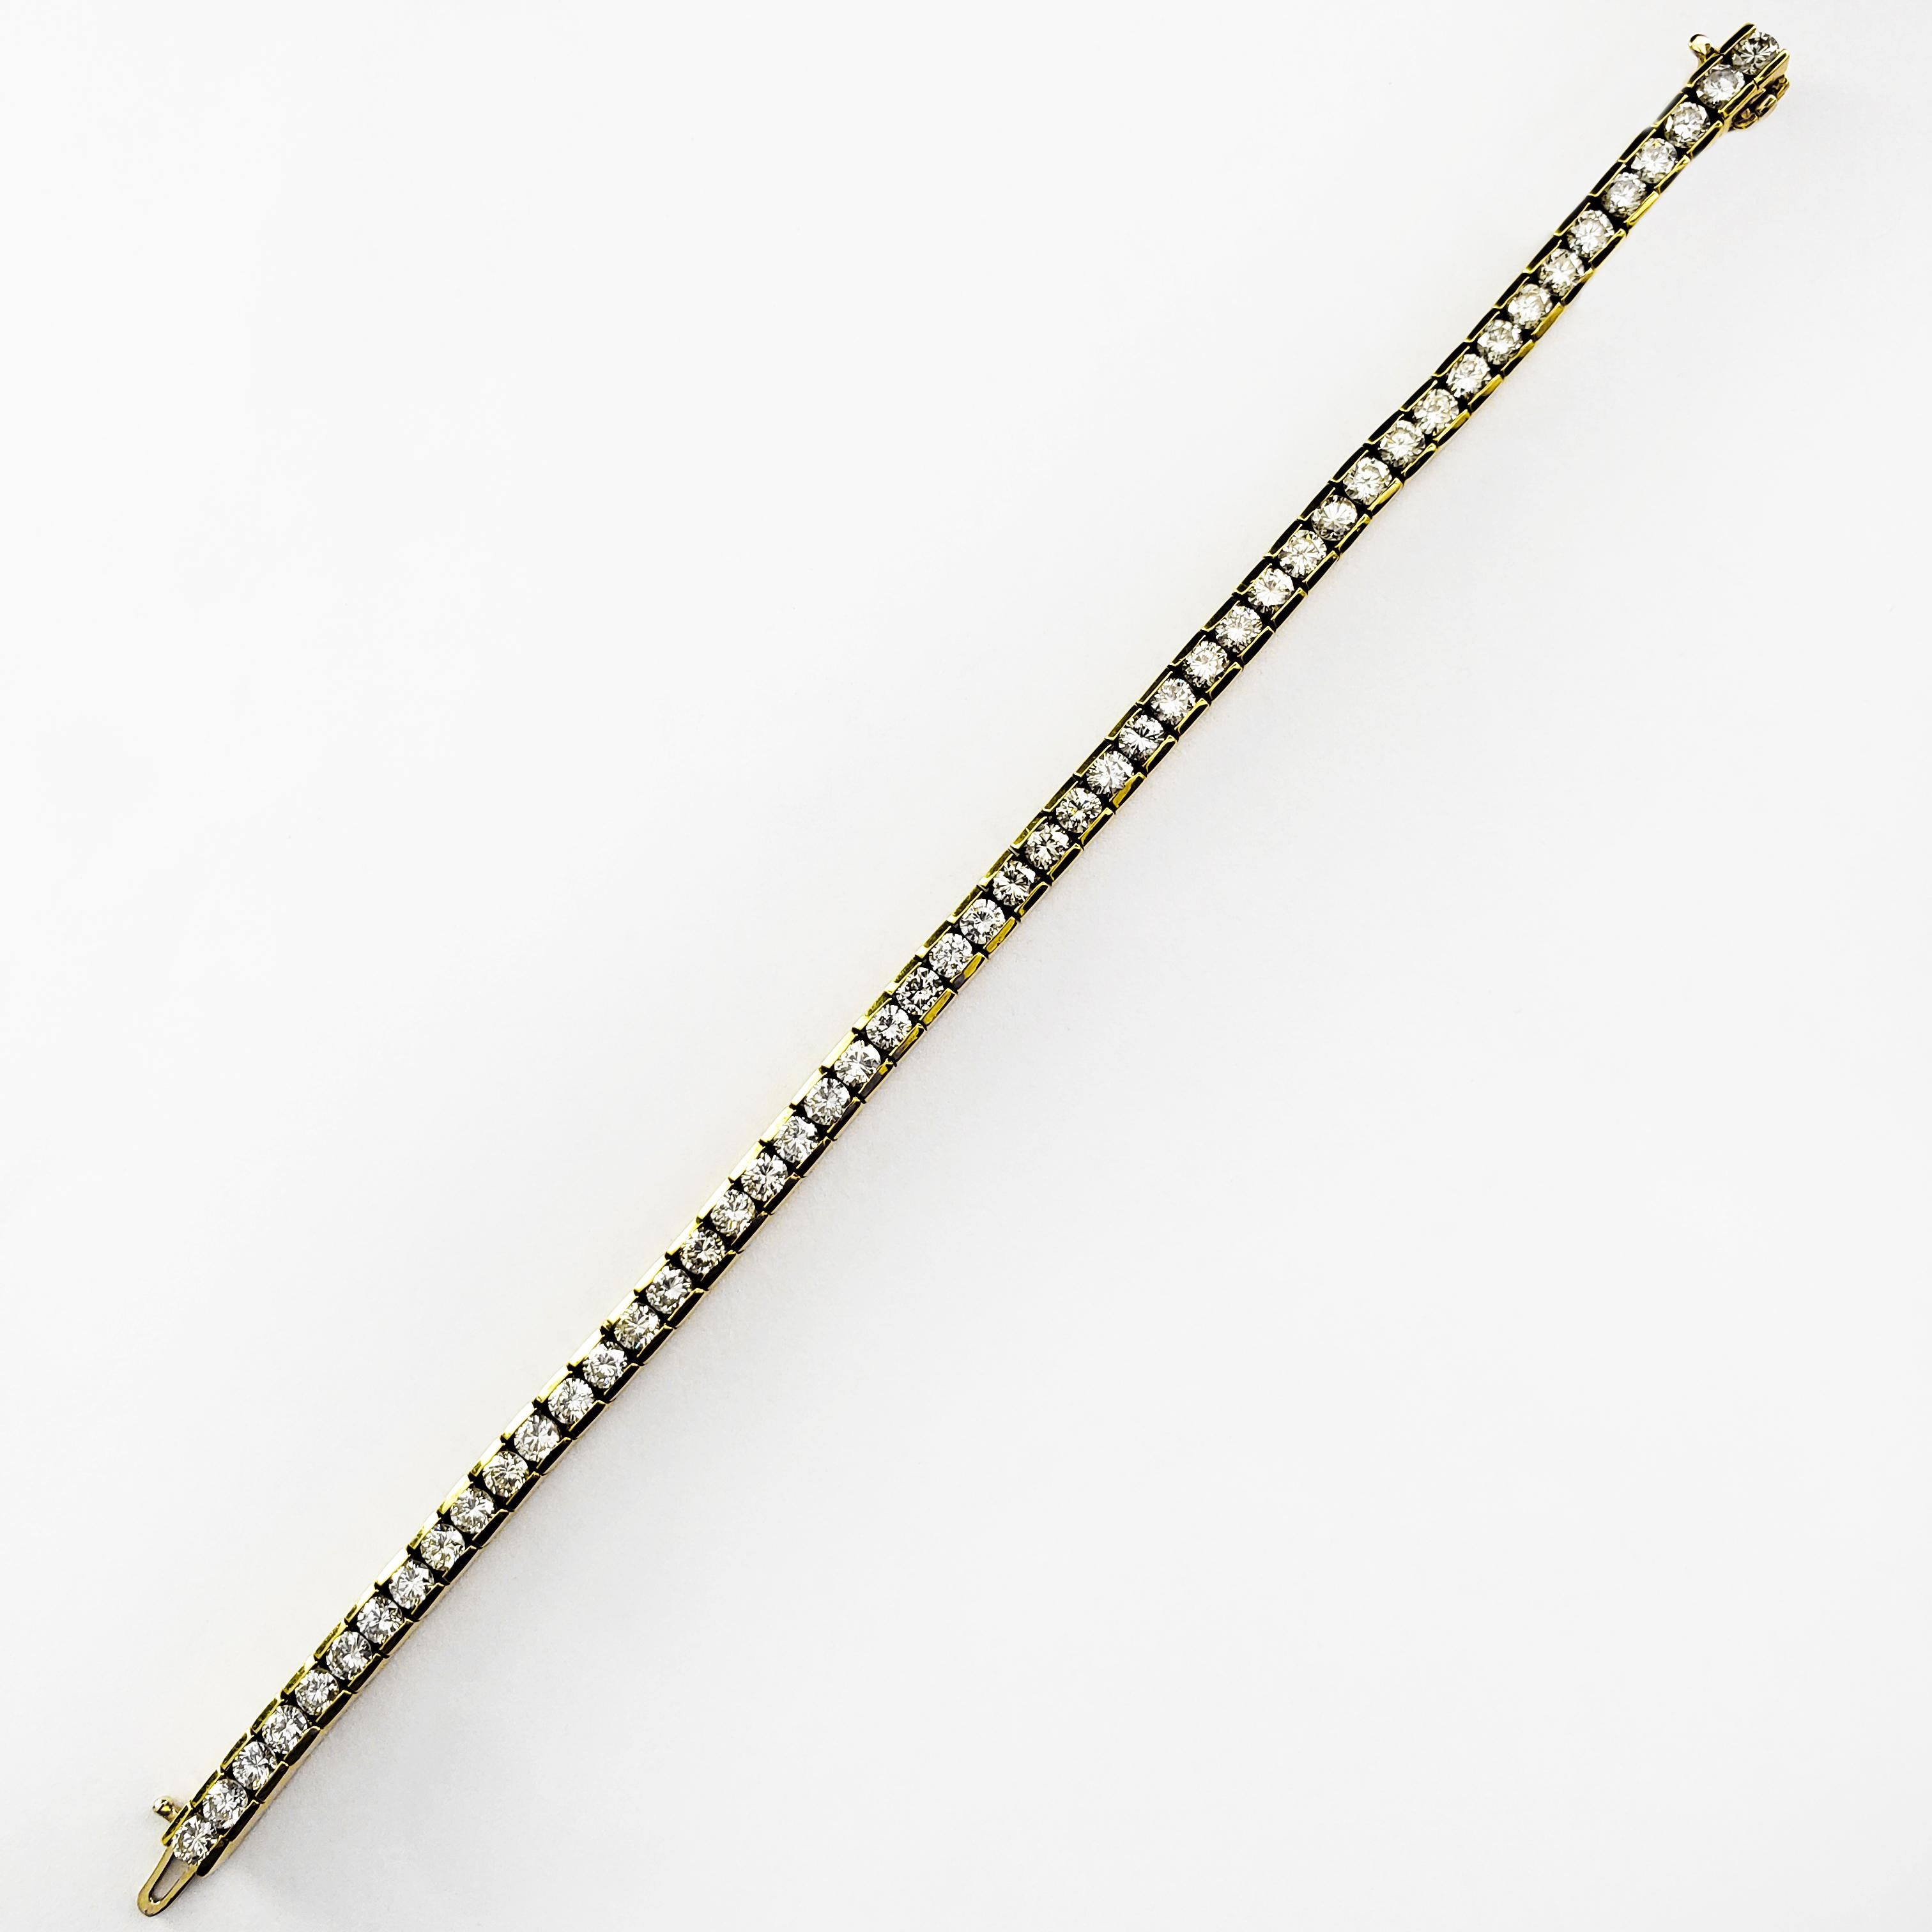 A classic tennis bracelet style showcasing 50 round brilliant diamonds weighing 7.50 carats total. Made with 18K Yellow Gold. 7 inches in Length.

Roman Malakov is a custom house, specializing in creating anything you can imagine. If you would like